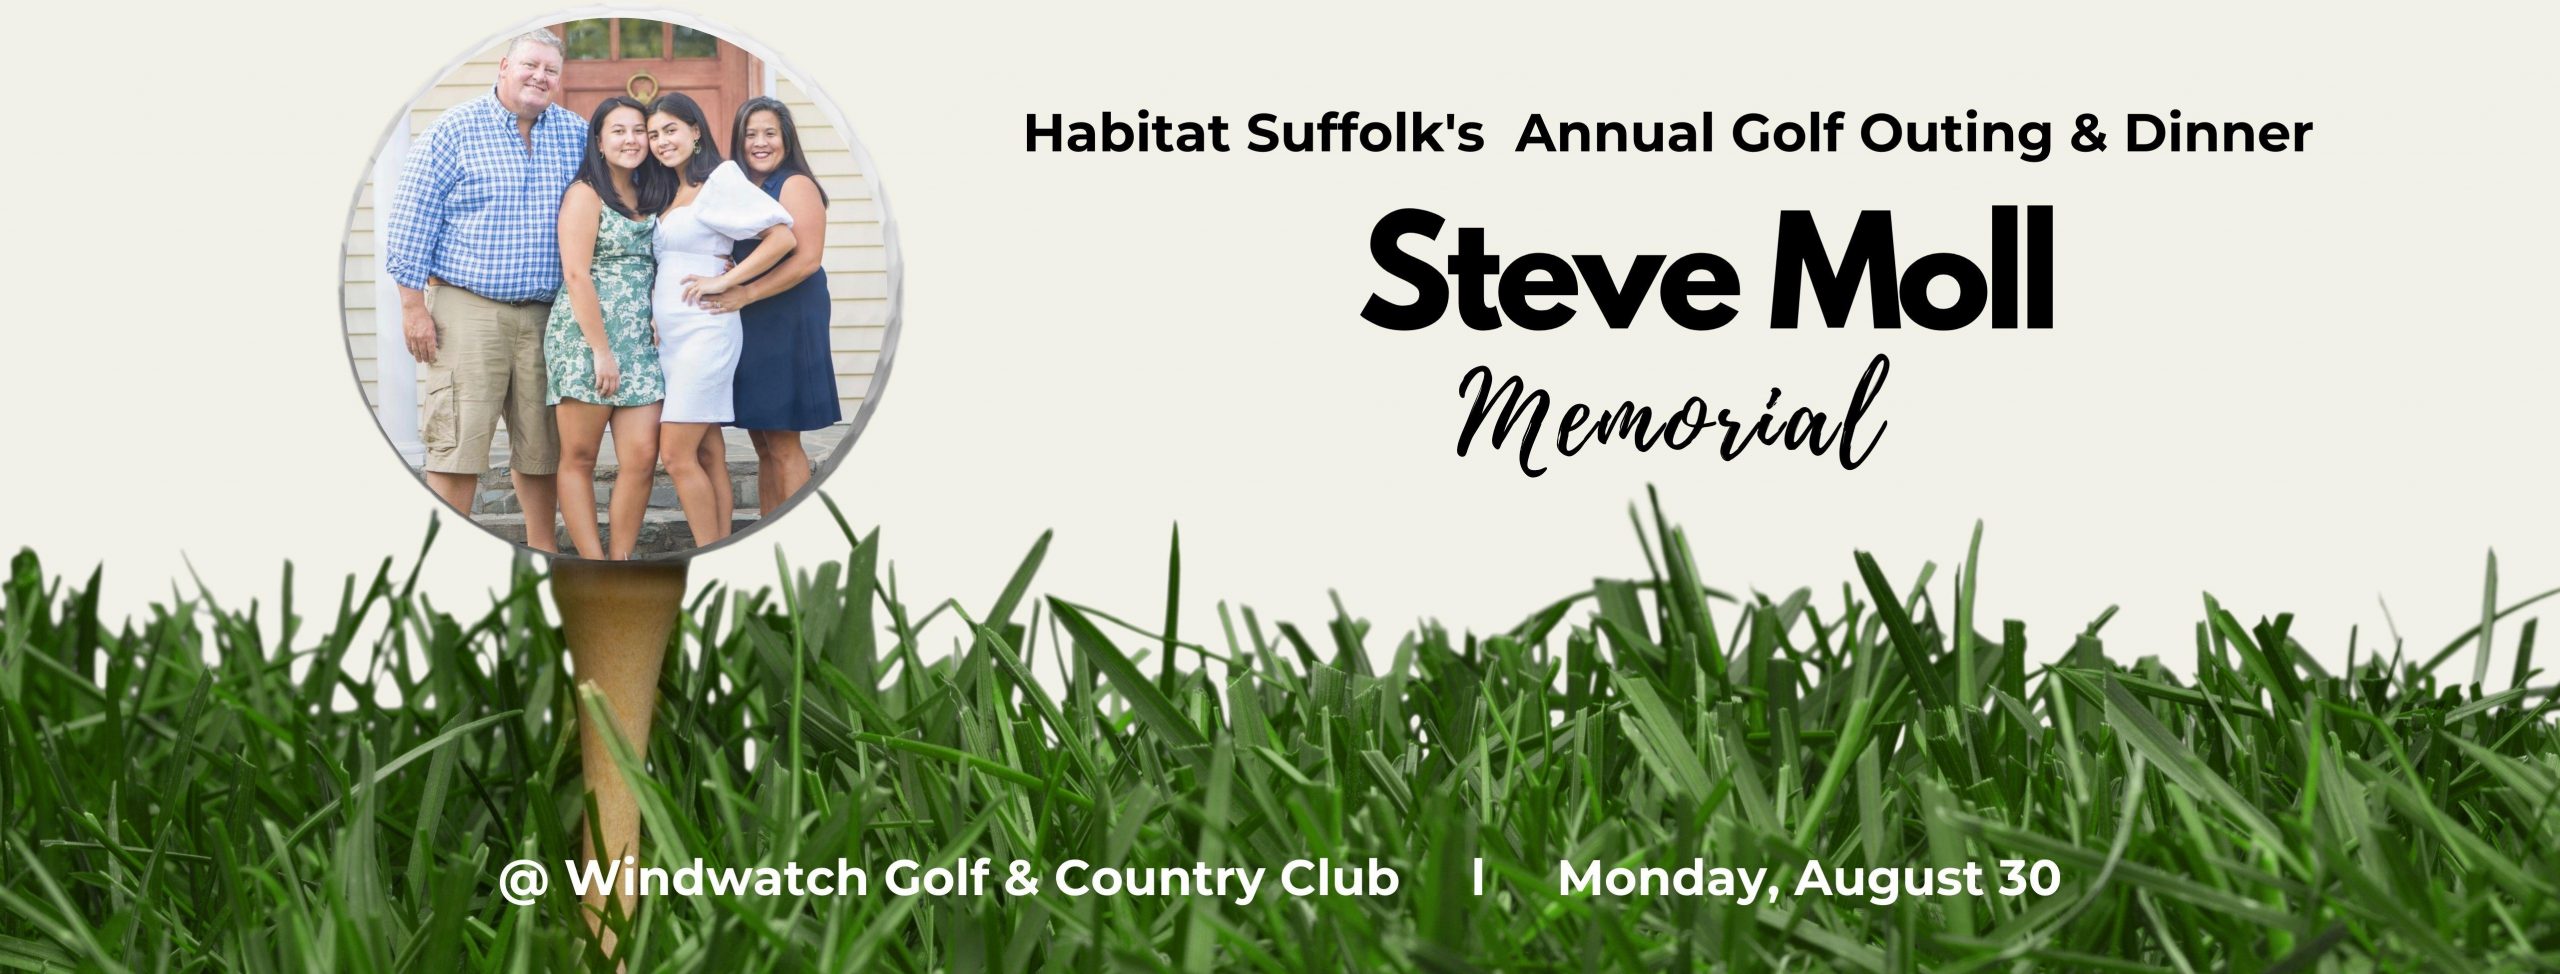 Habitat Suffolk’s 2021 Annual Golf Outing & Dinner in Memory of Steve Moll